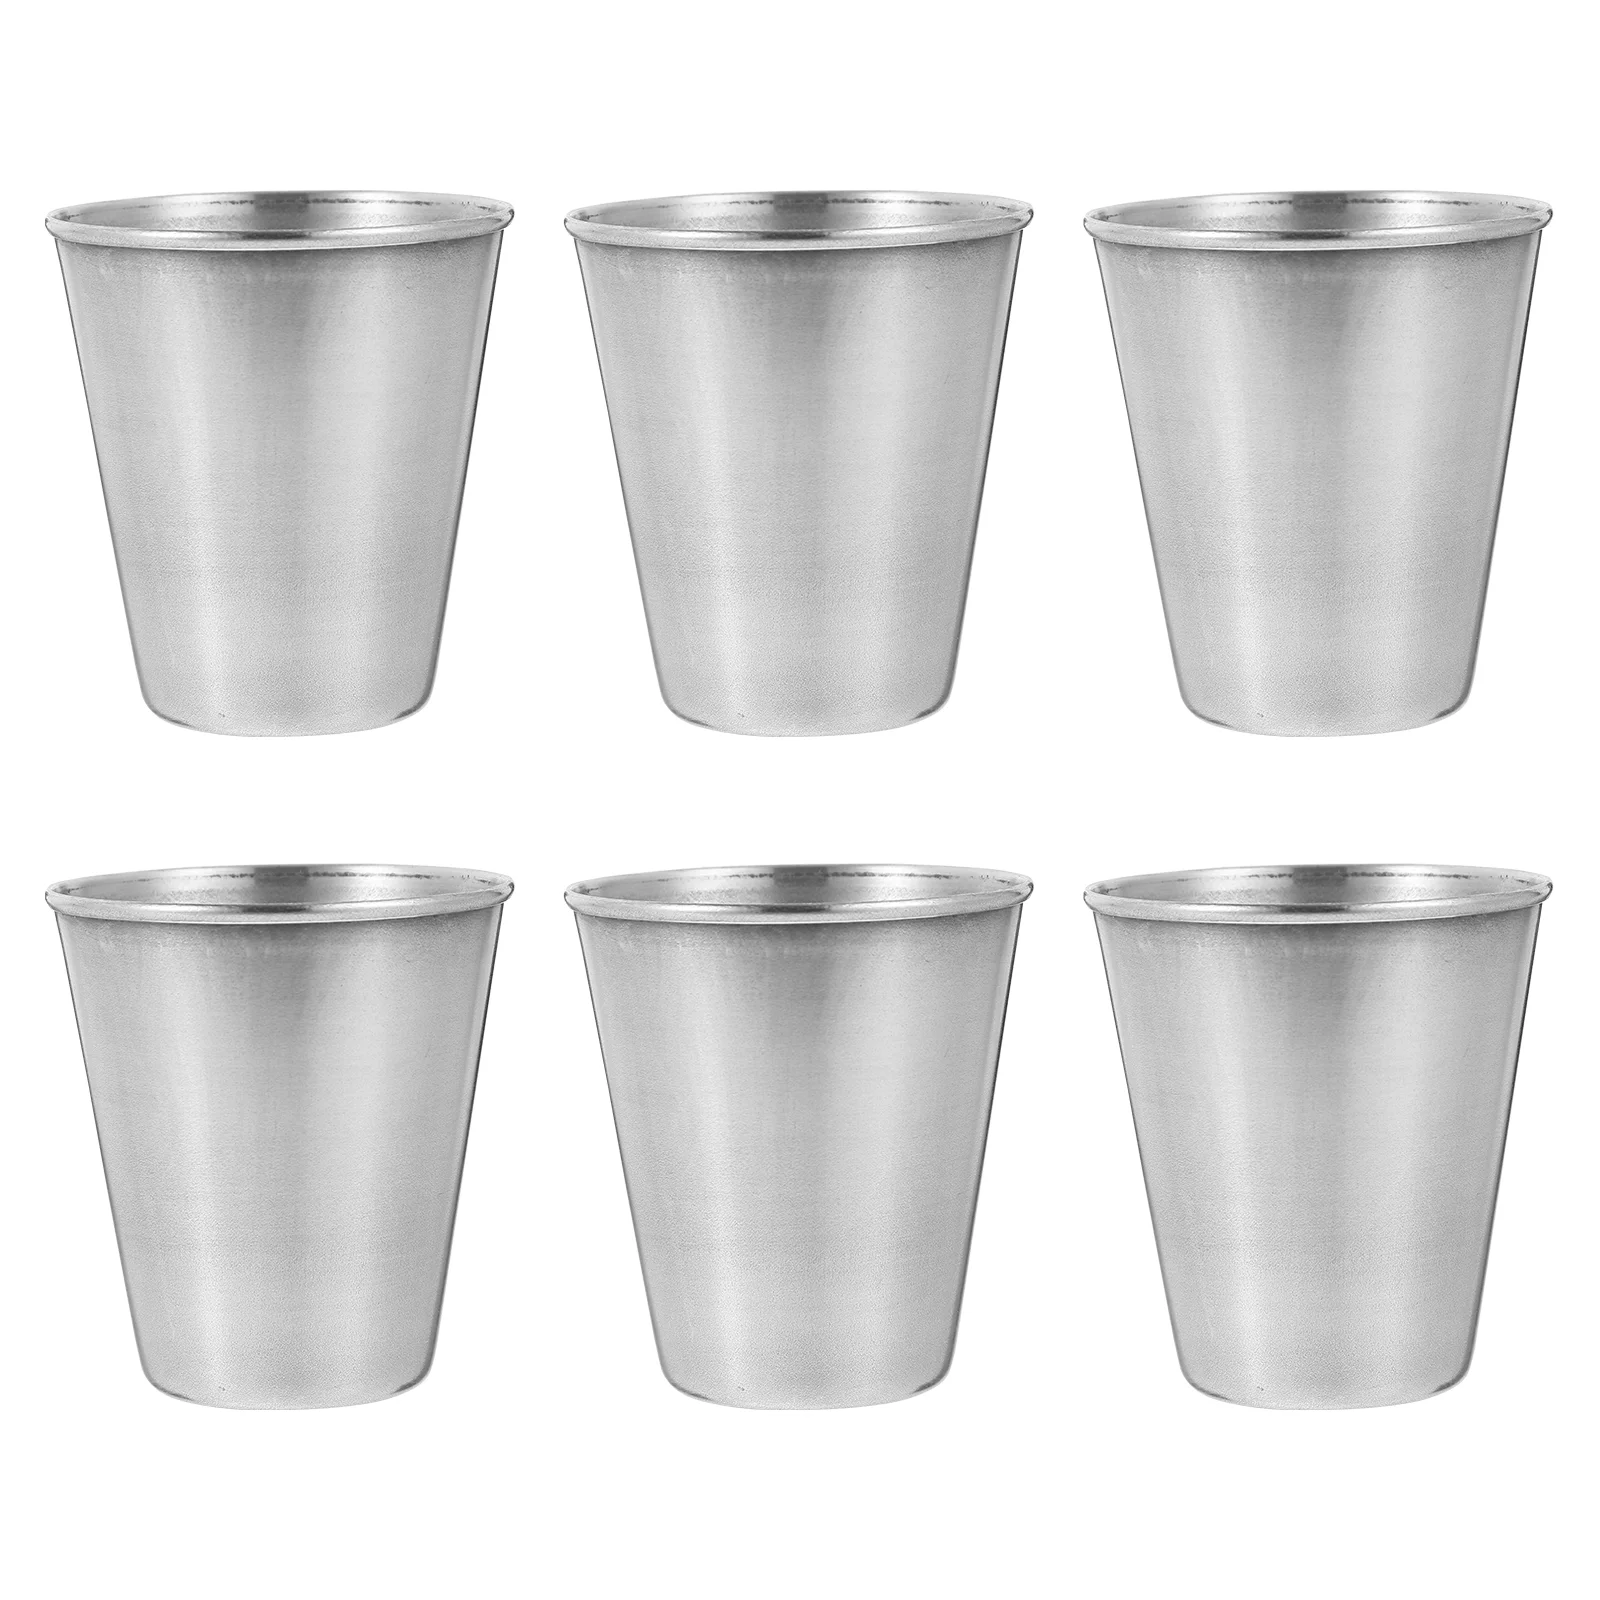 

Shot Cups Metal Glasses Goblet Pint Steel Tequila Espresso Sauce Drinking Glass Stainless Tumbler Dipping Vessel Whiskey Cup